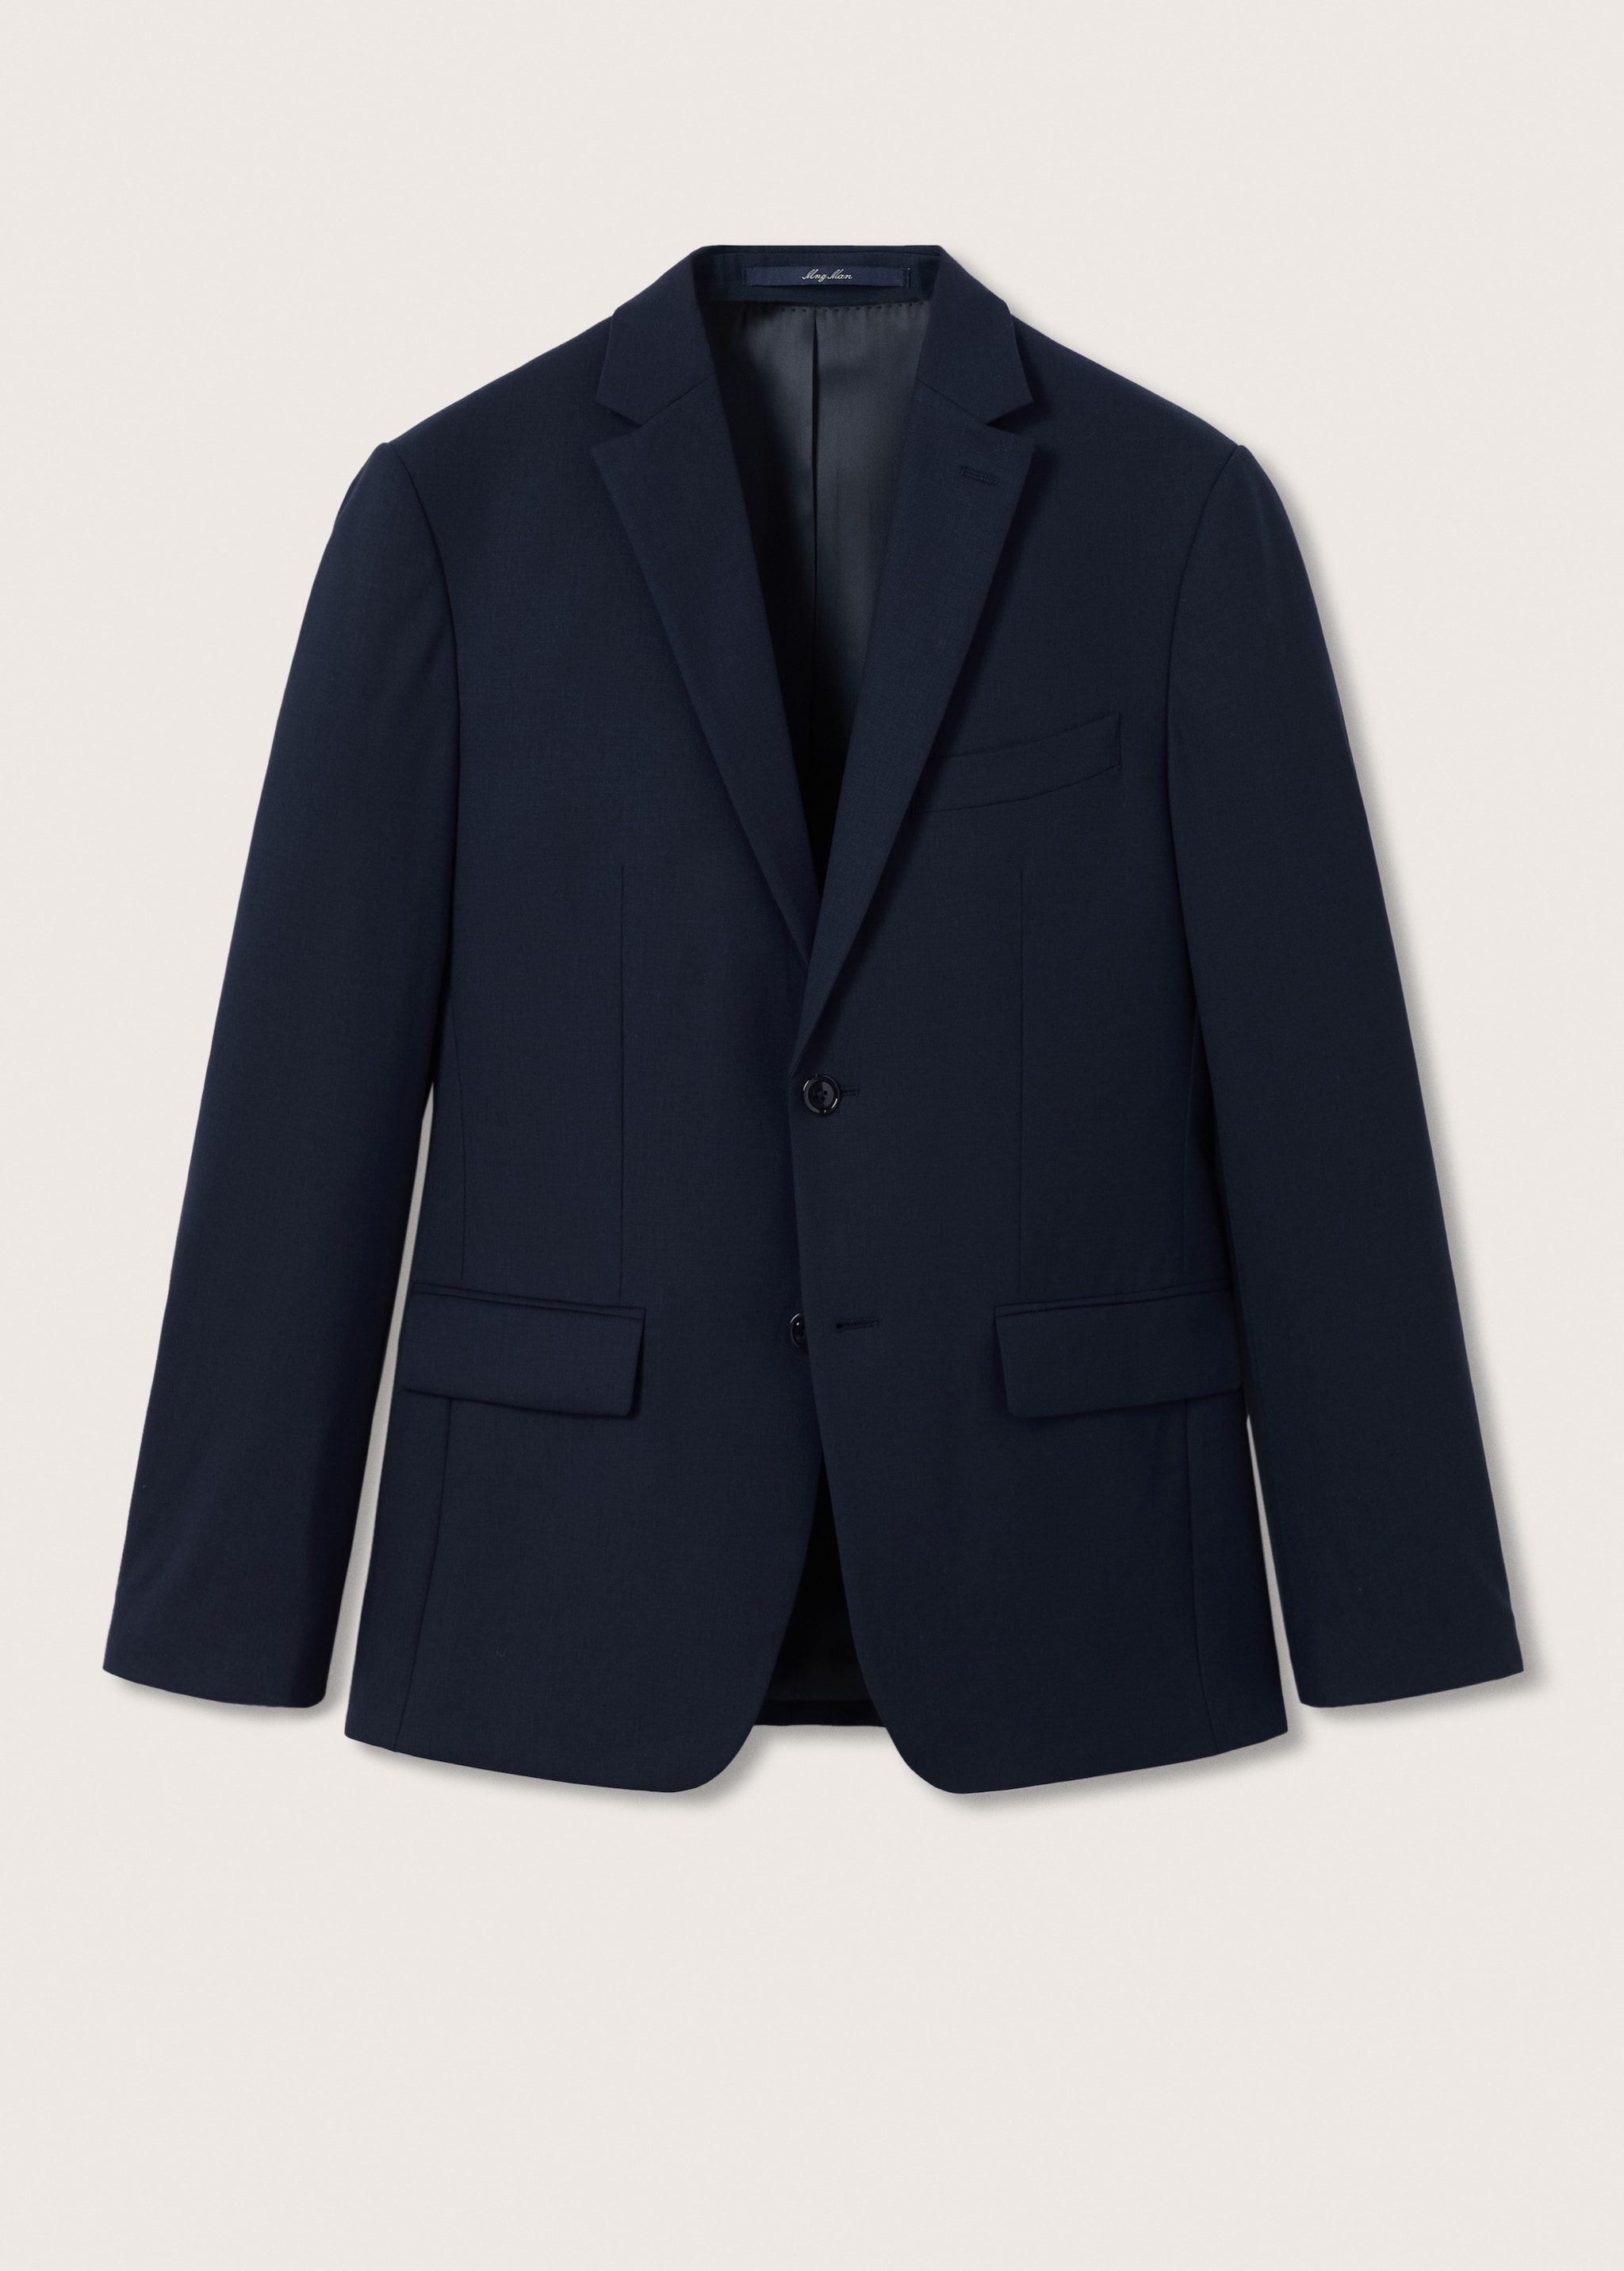 Wool suit jacket - Article without model